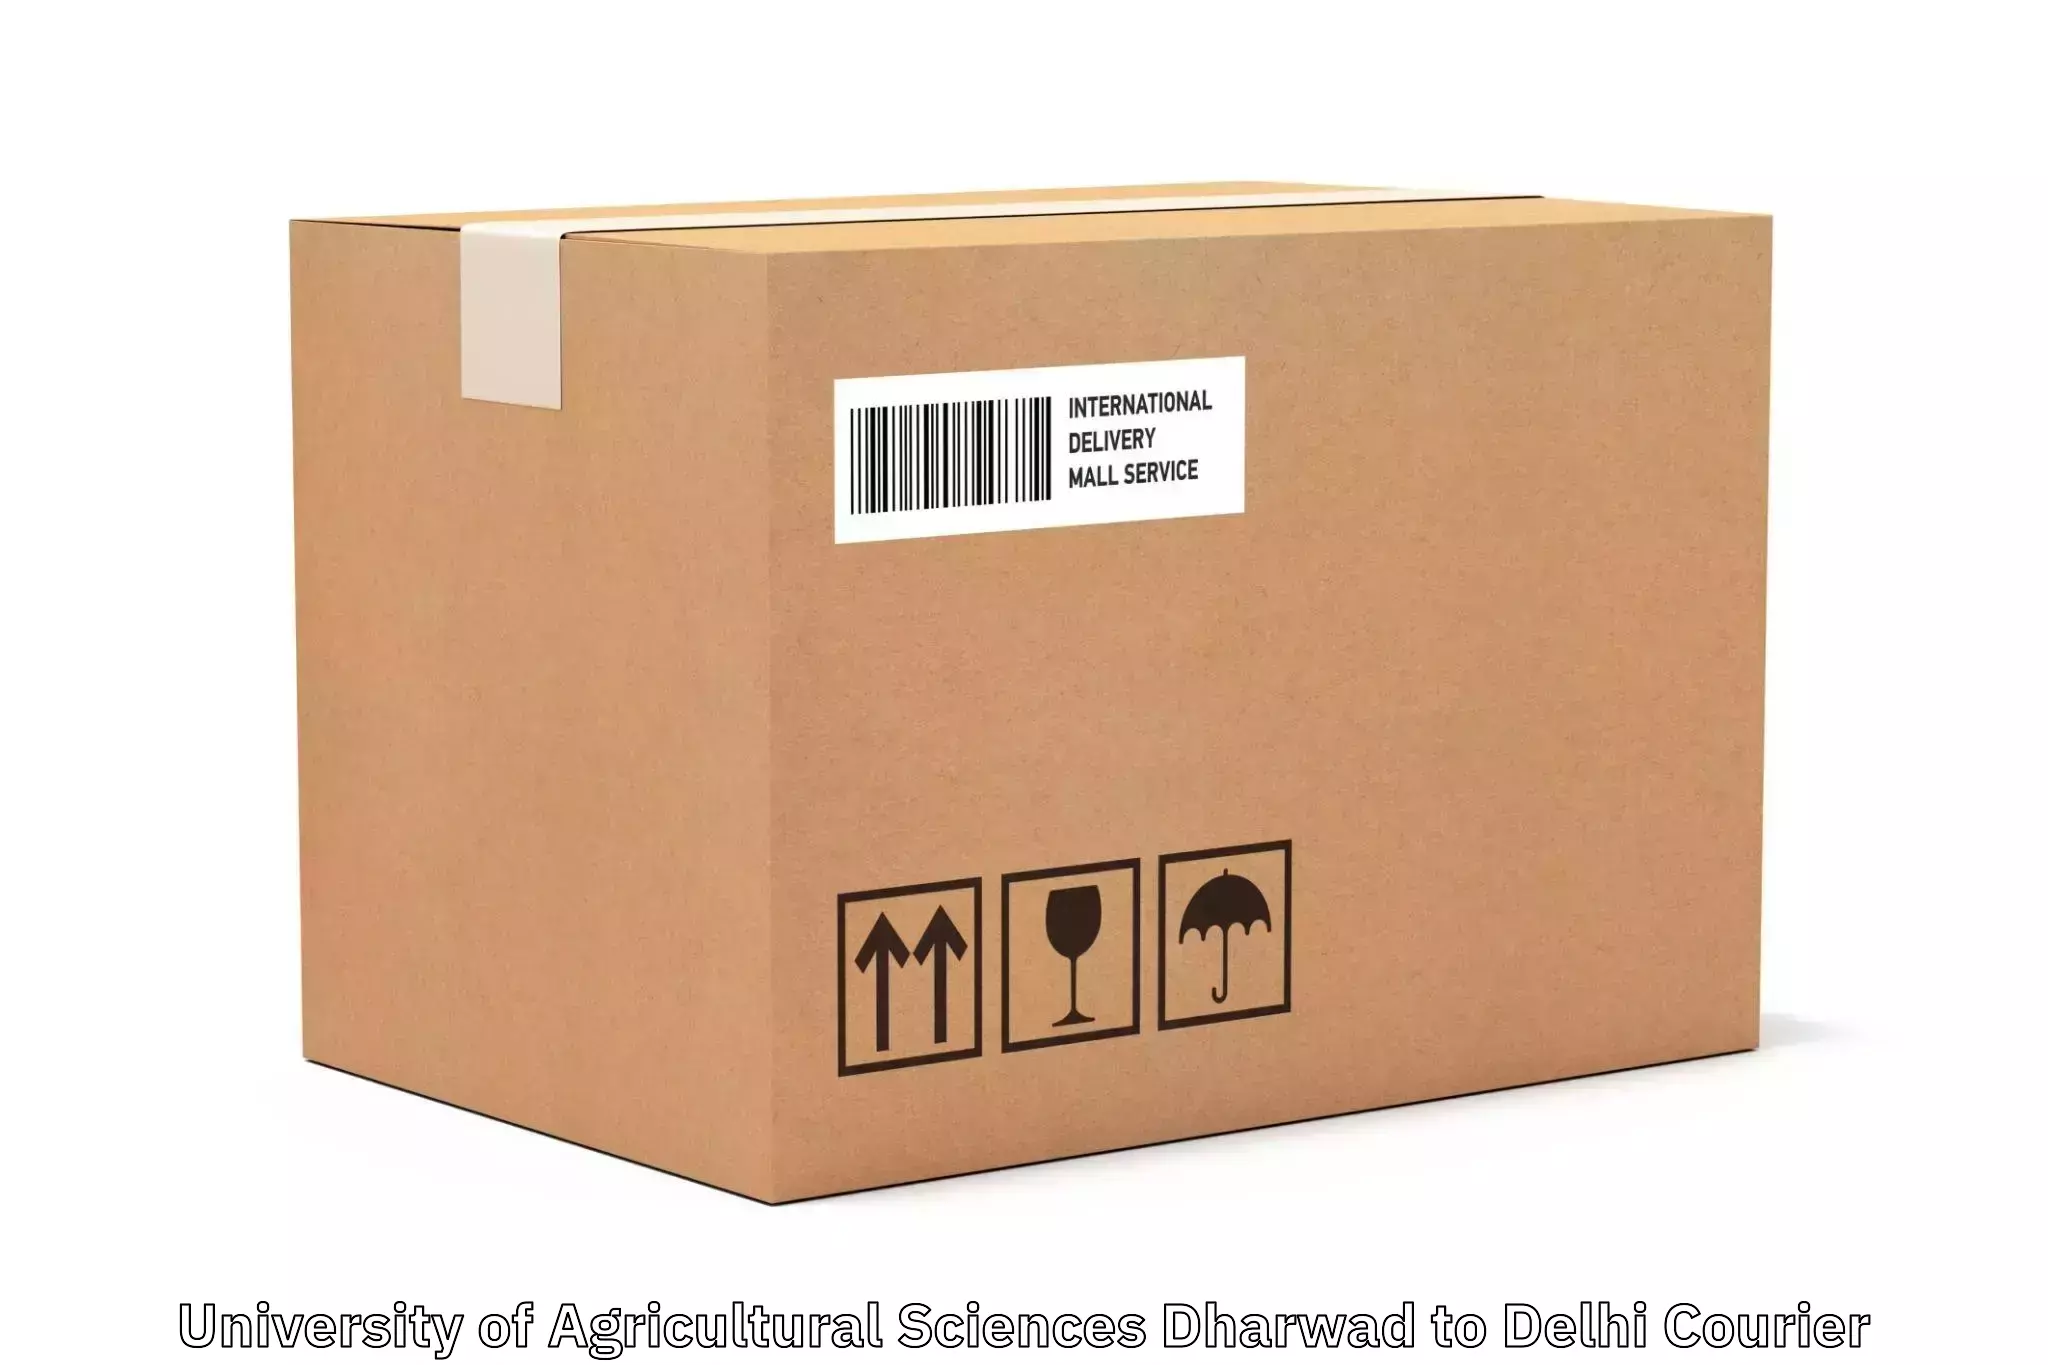 Customer-centric shipping University of Agricultural Sciences Dharwad to NCR